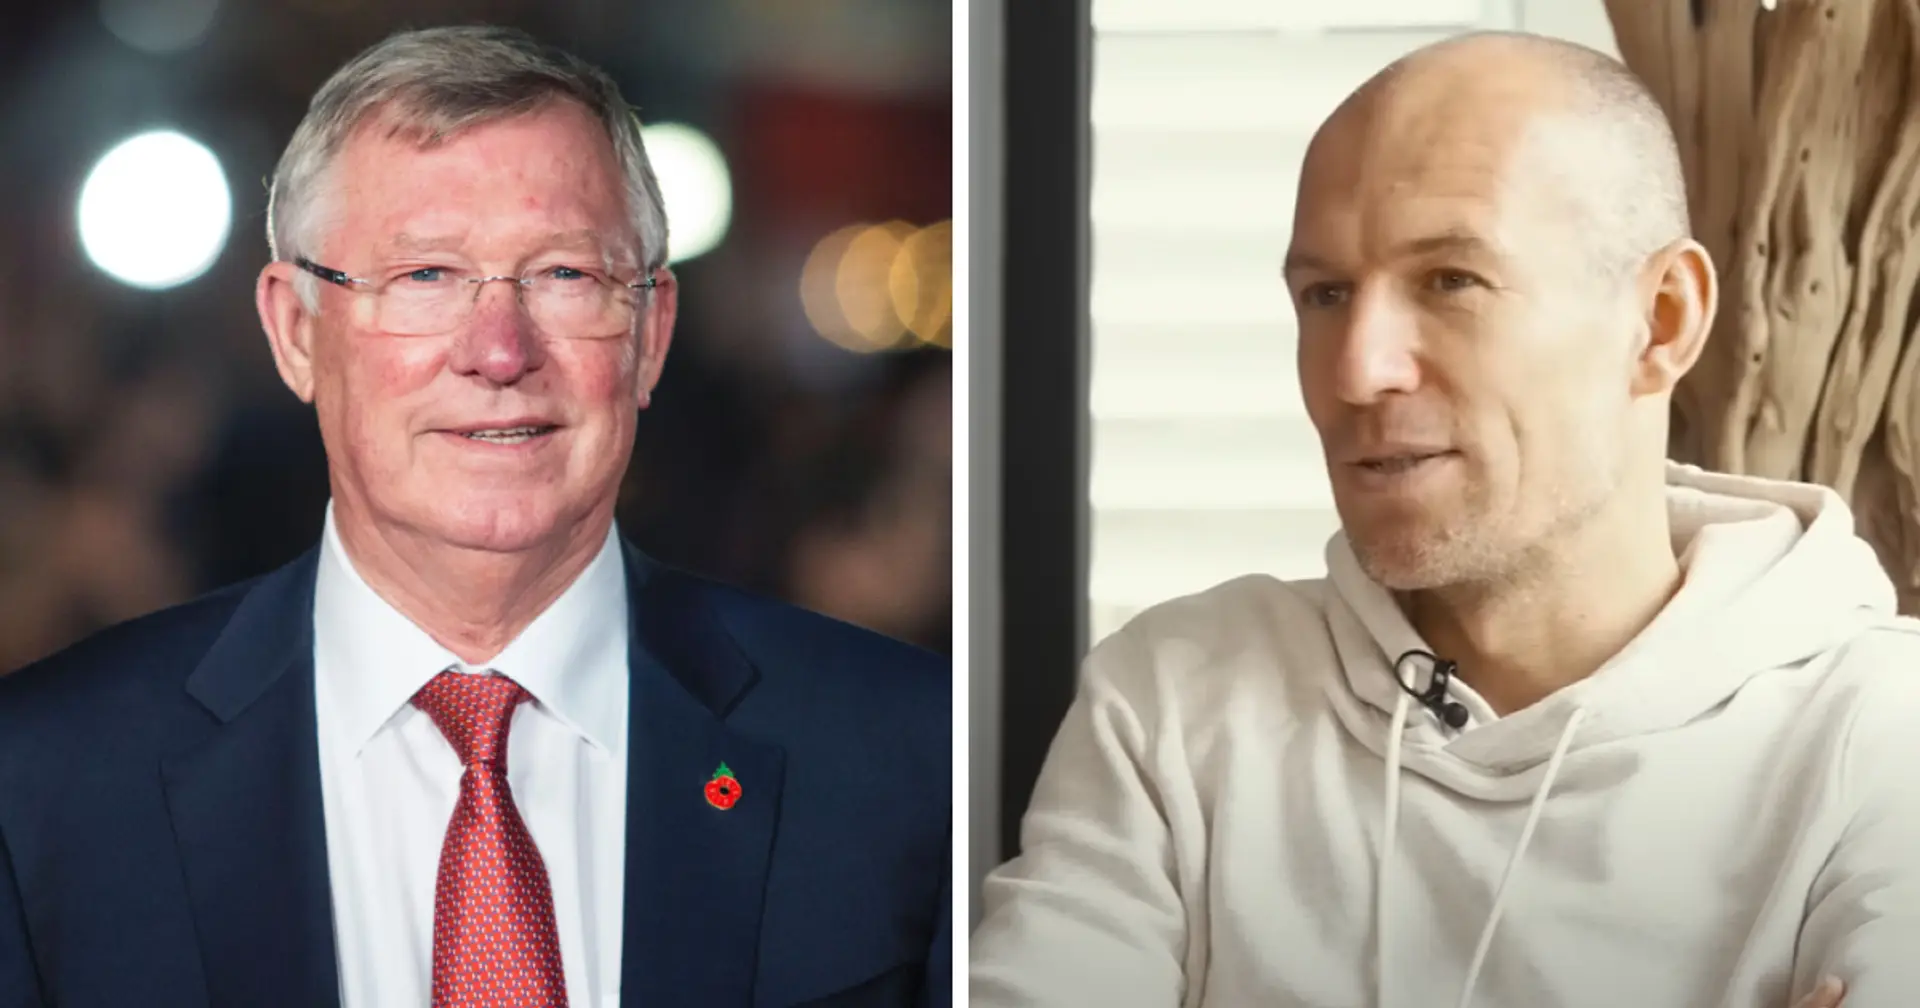 'We spoke about football and life': Arjen Robben recalls how he almost joined Man United after dinner with Ferguson